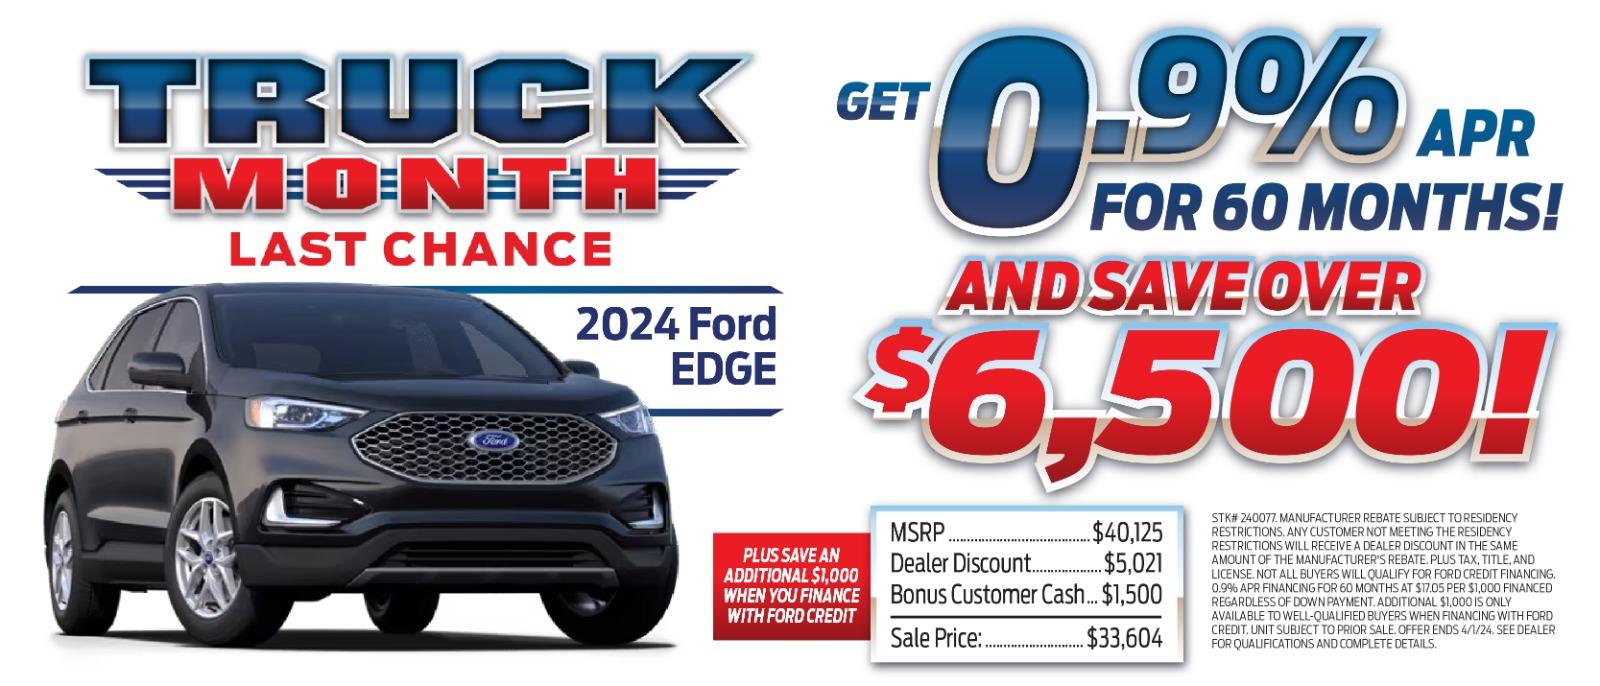 March Ford Edge hero banner offer